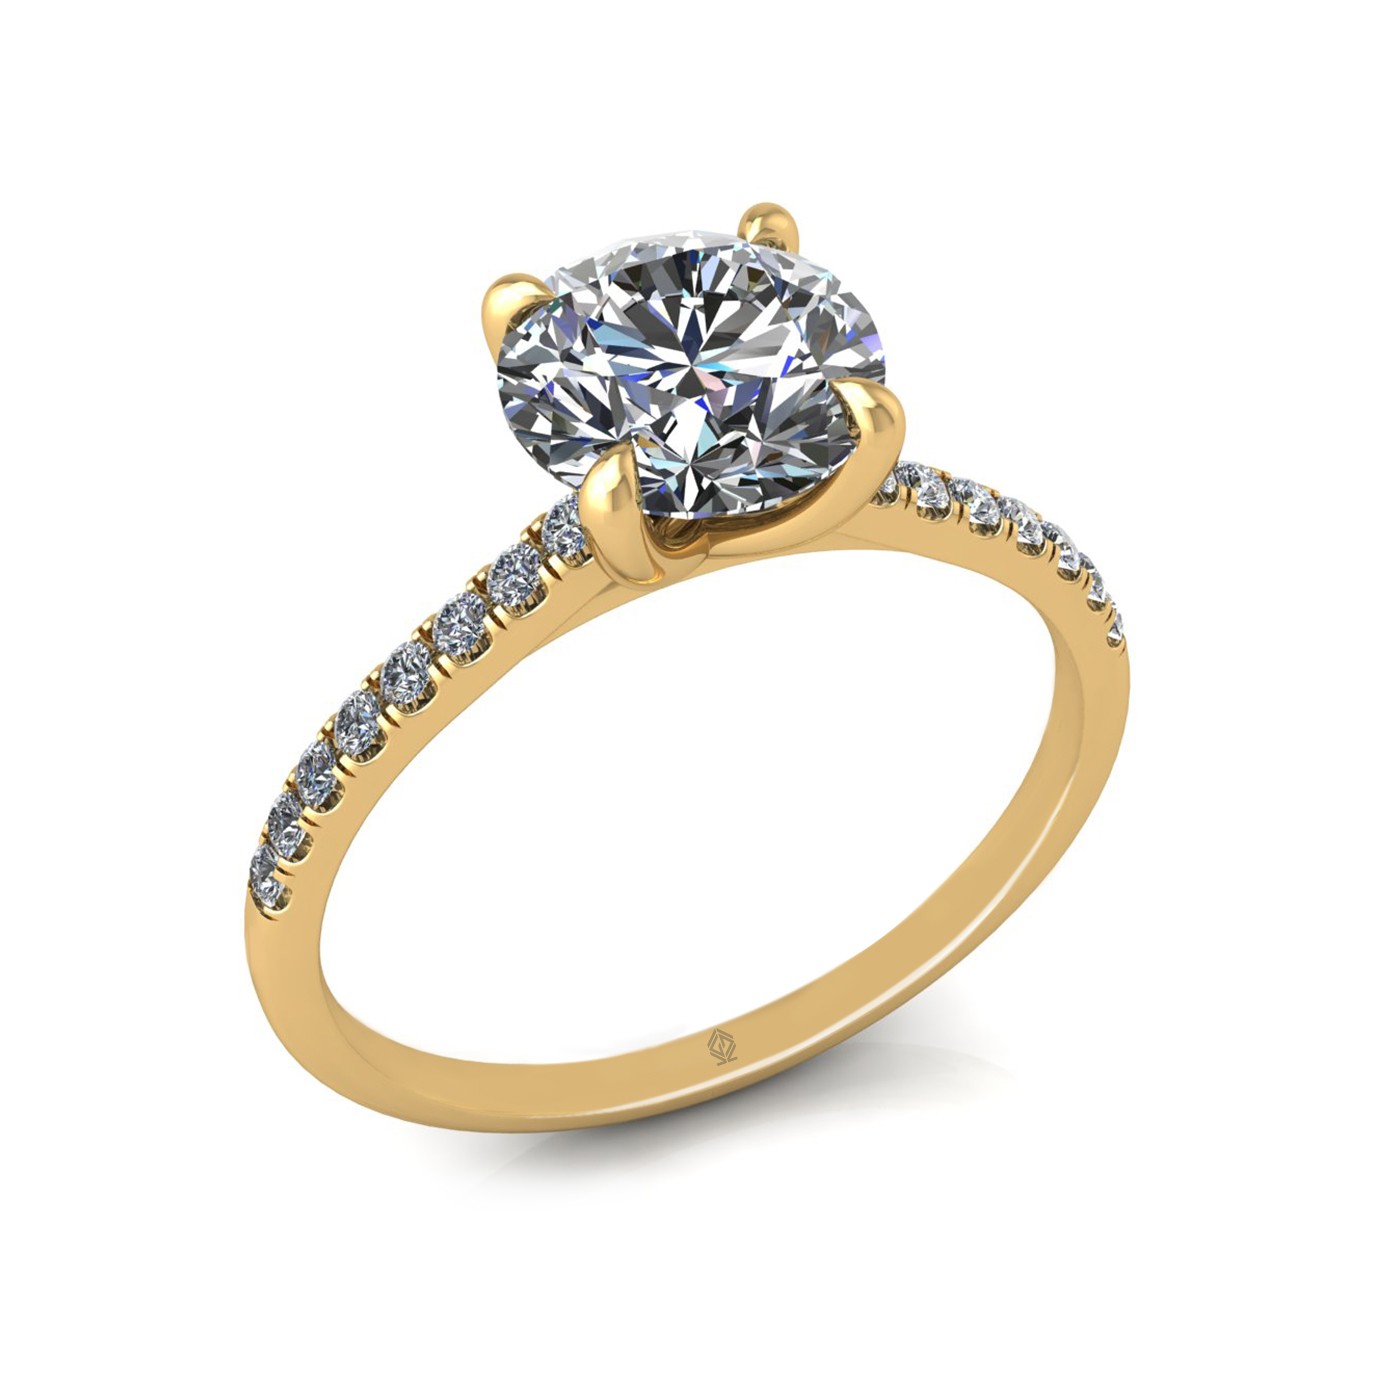 18k yellow gold 1.5ct 4 prongs round cut diamond engagement ring with whisper thin pavÉ set band